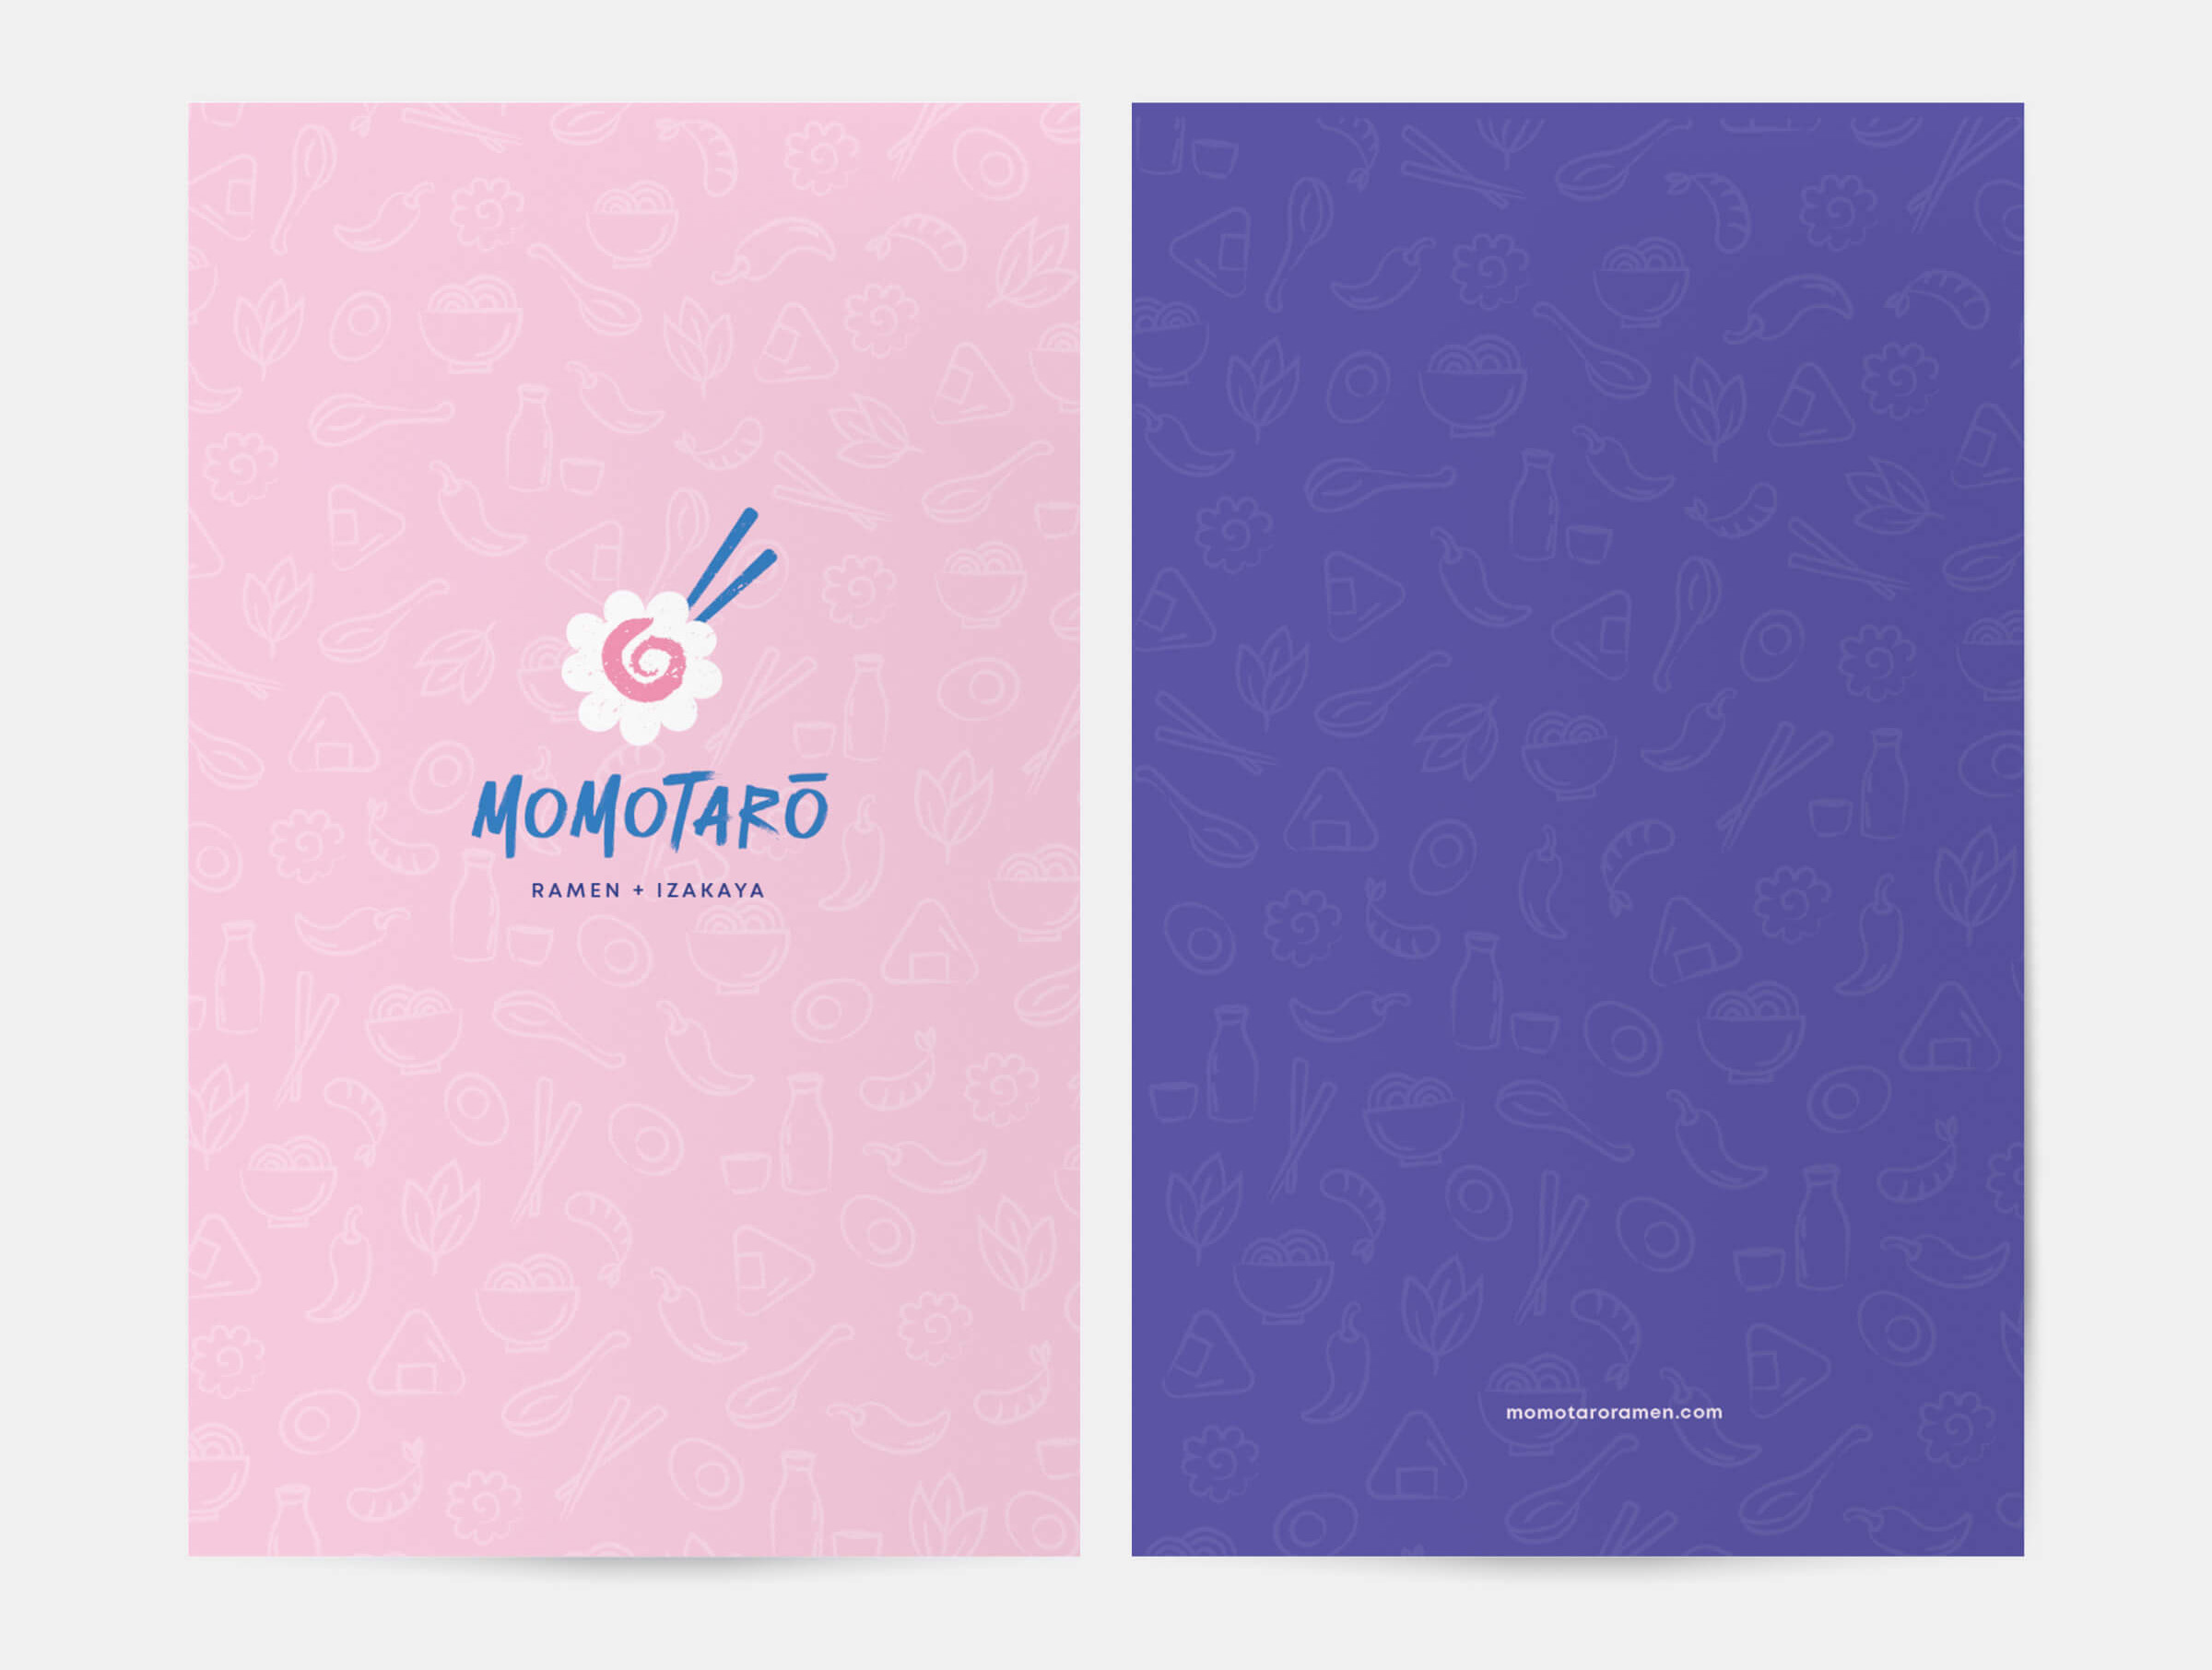 The front and back of the Momotaro dinner menu